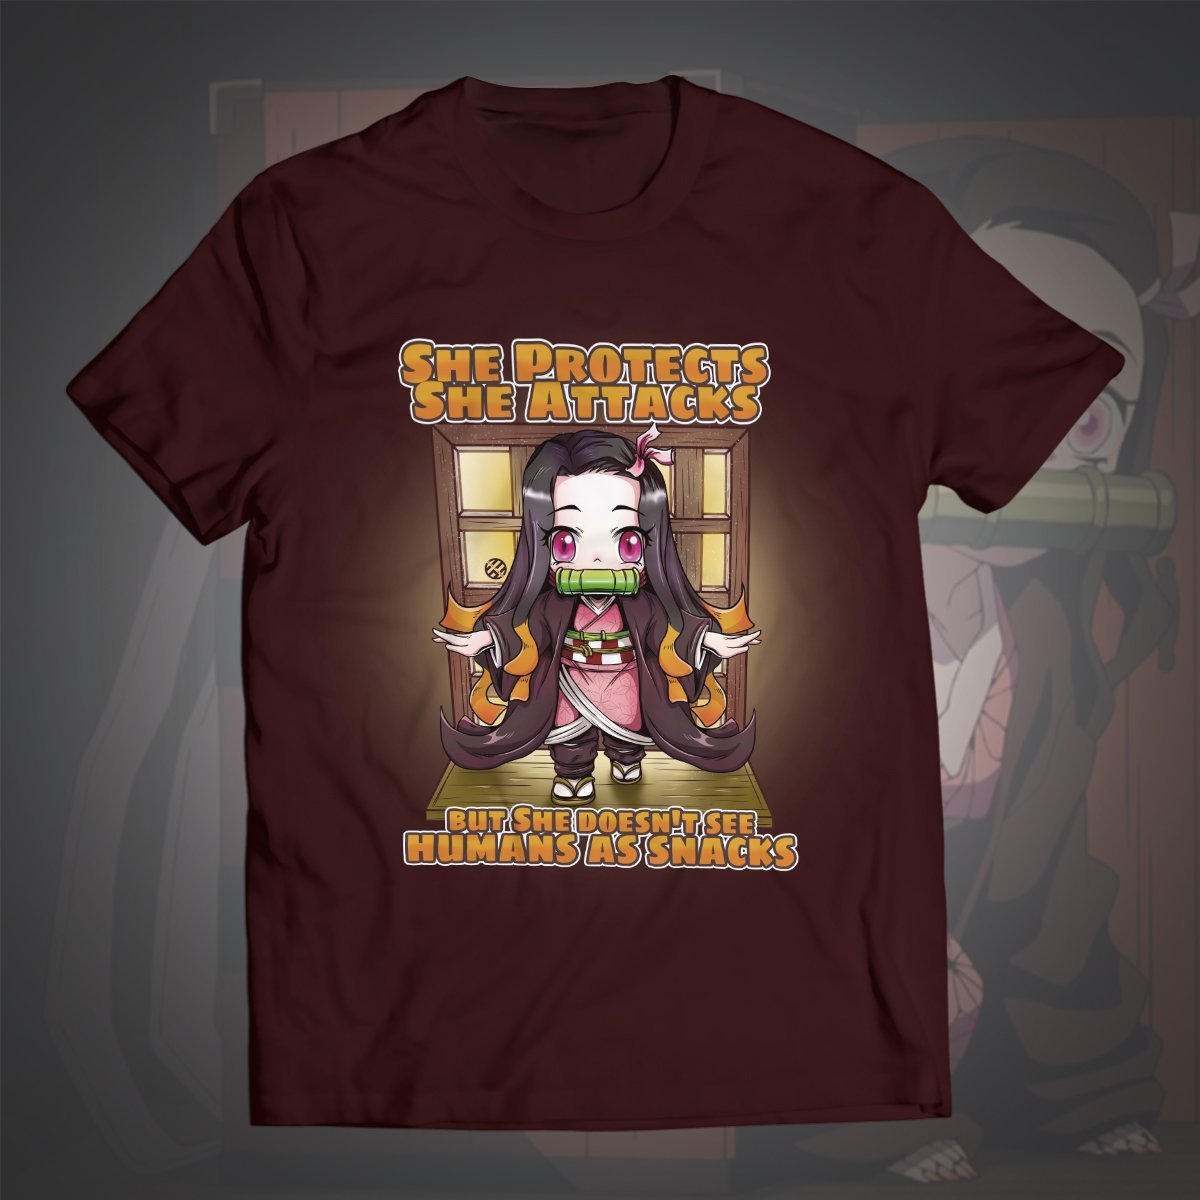 She Protects She Attacks but She doesn't see humans as snacks Unisex T-Shirt Official Demon Slayer Merch